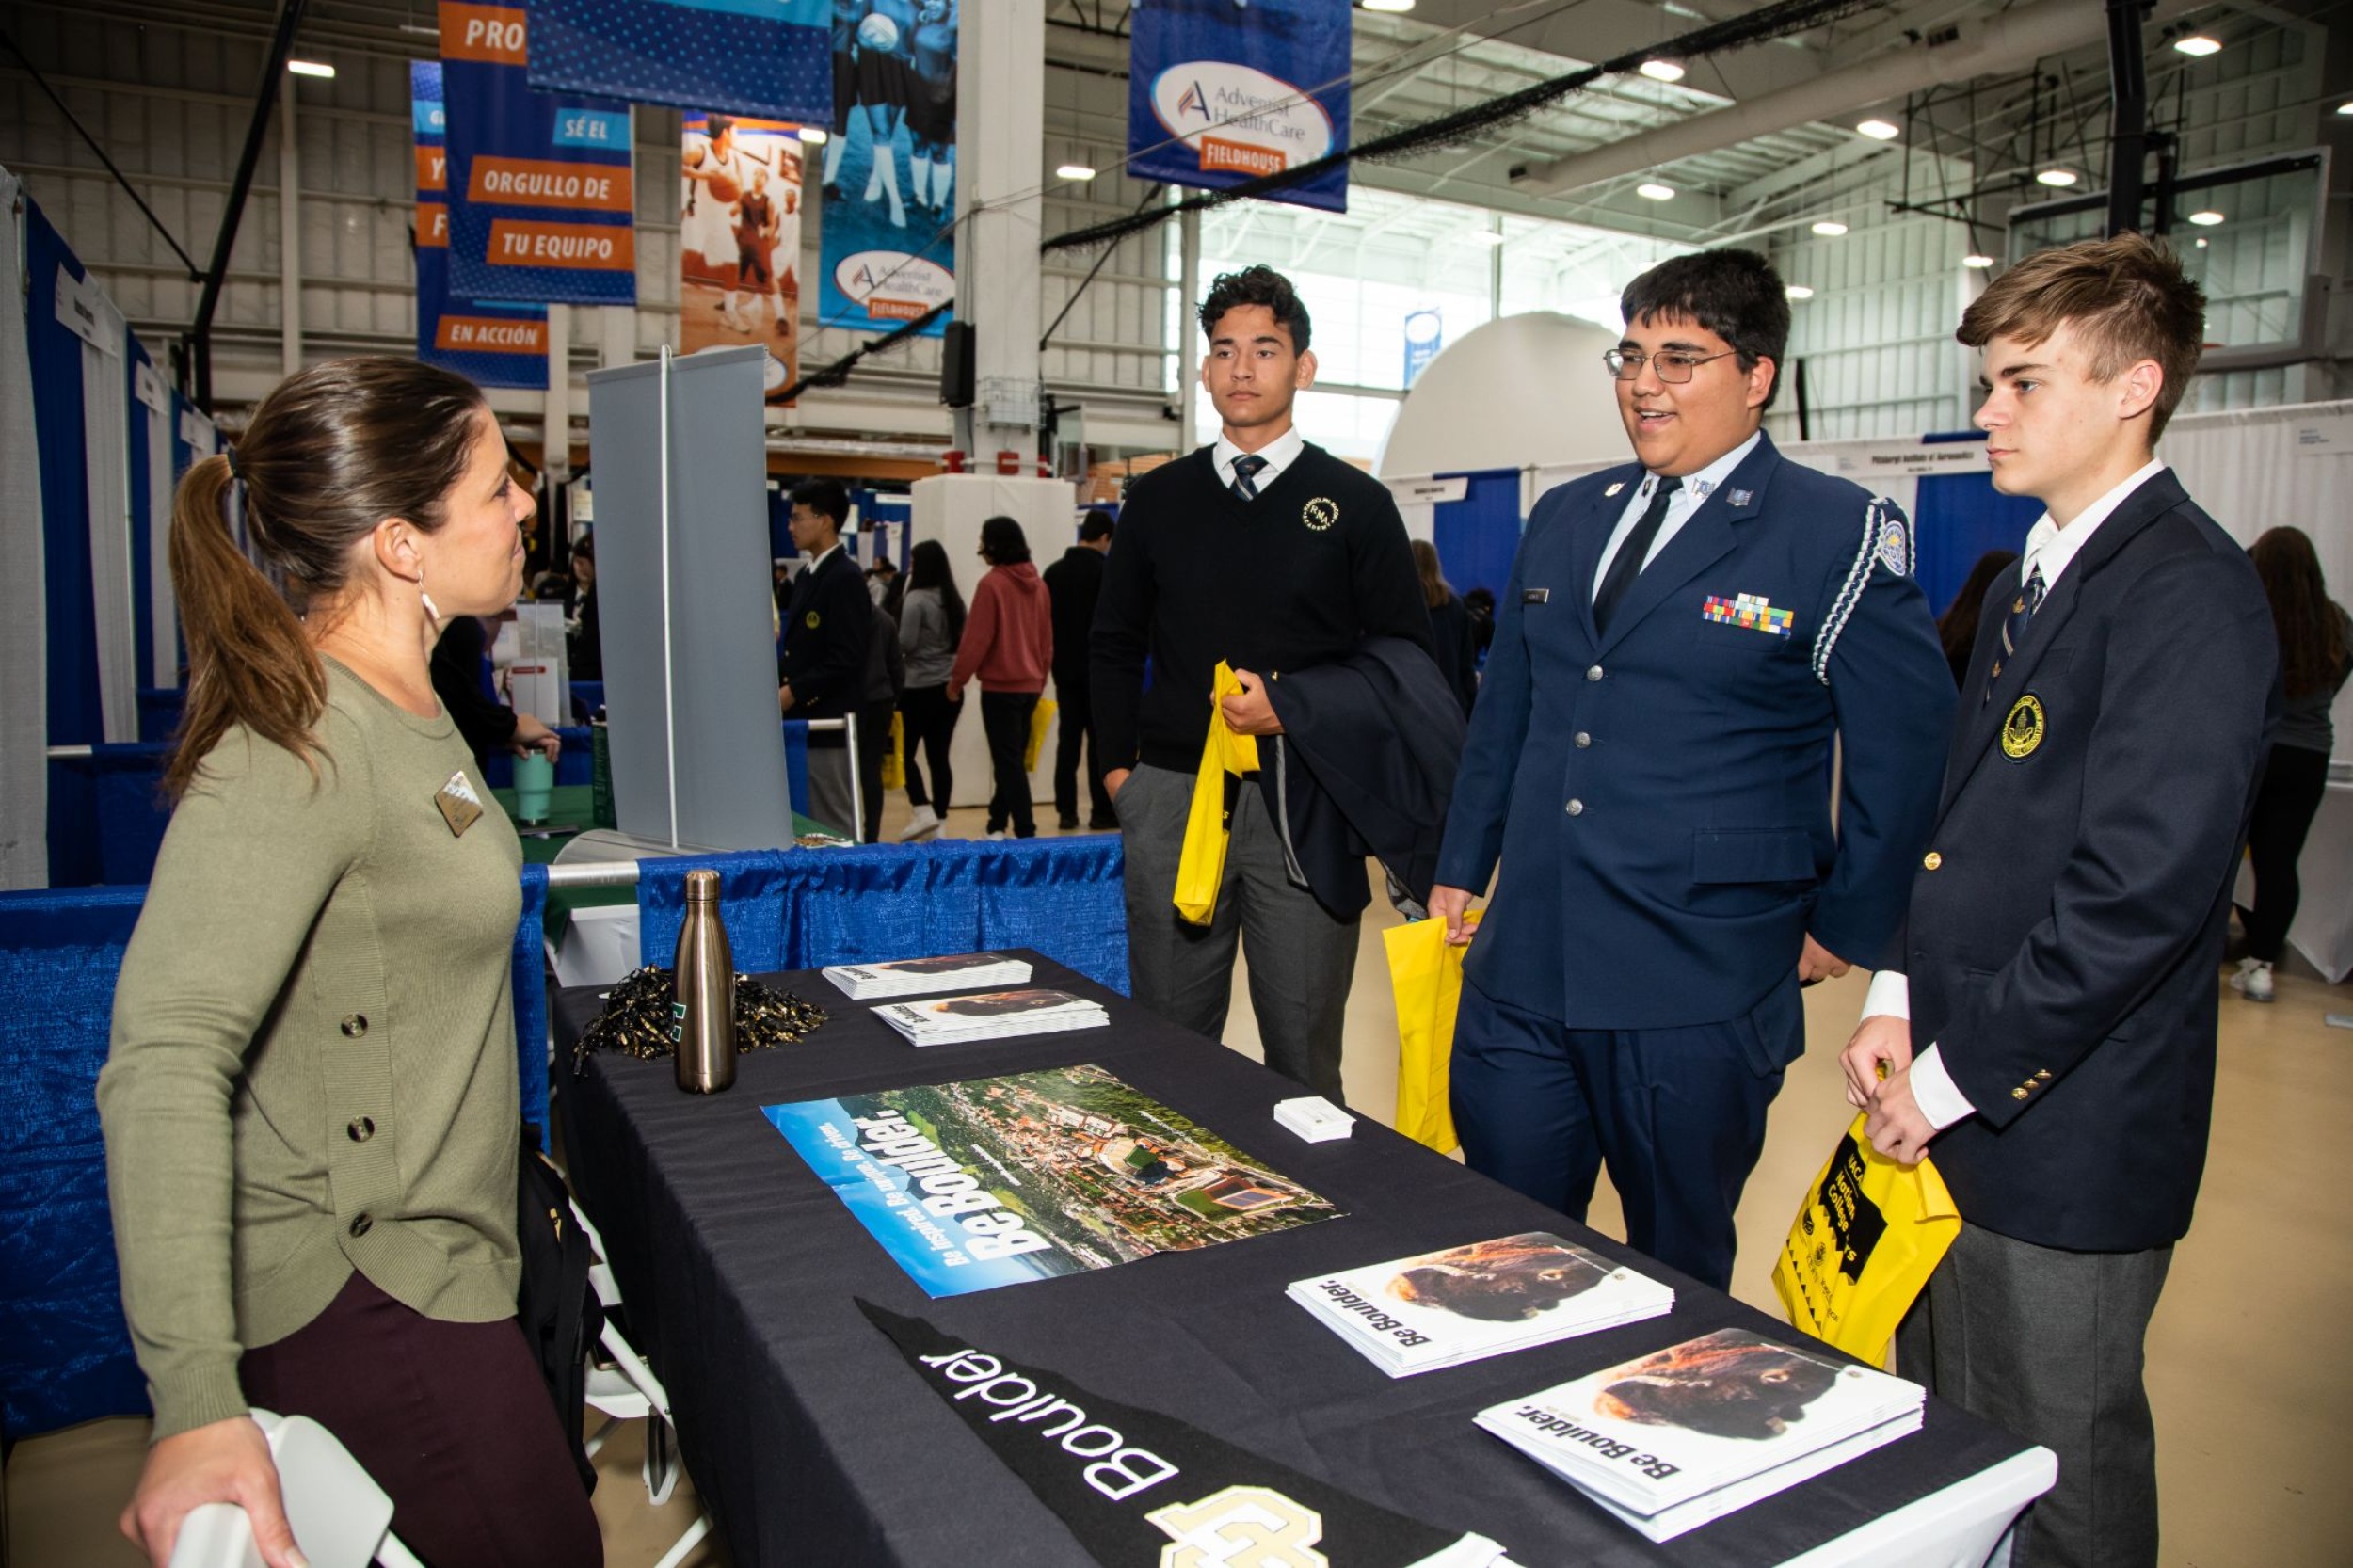 R-MA students interacting with a college representative at a university fair on campus